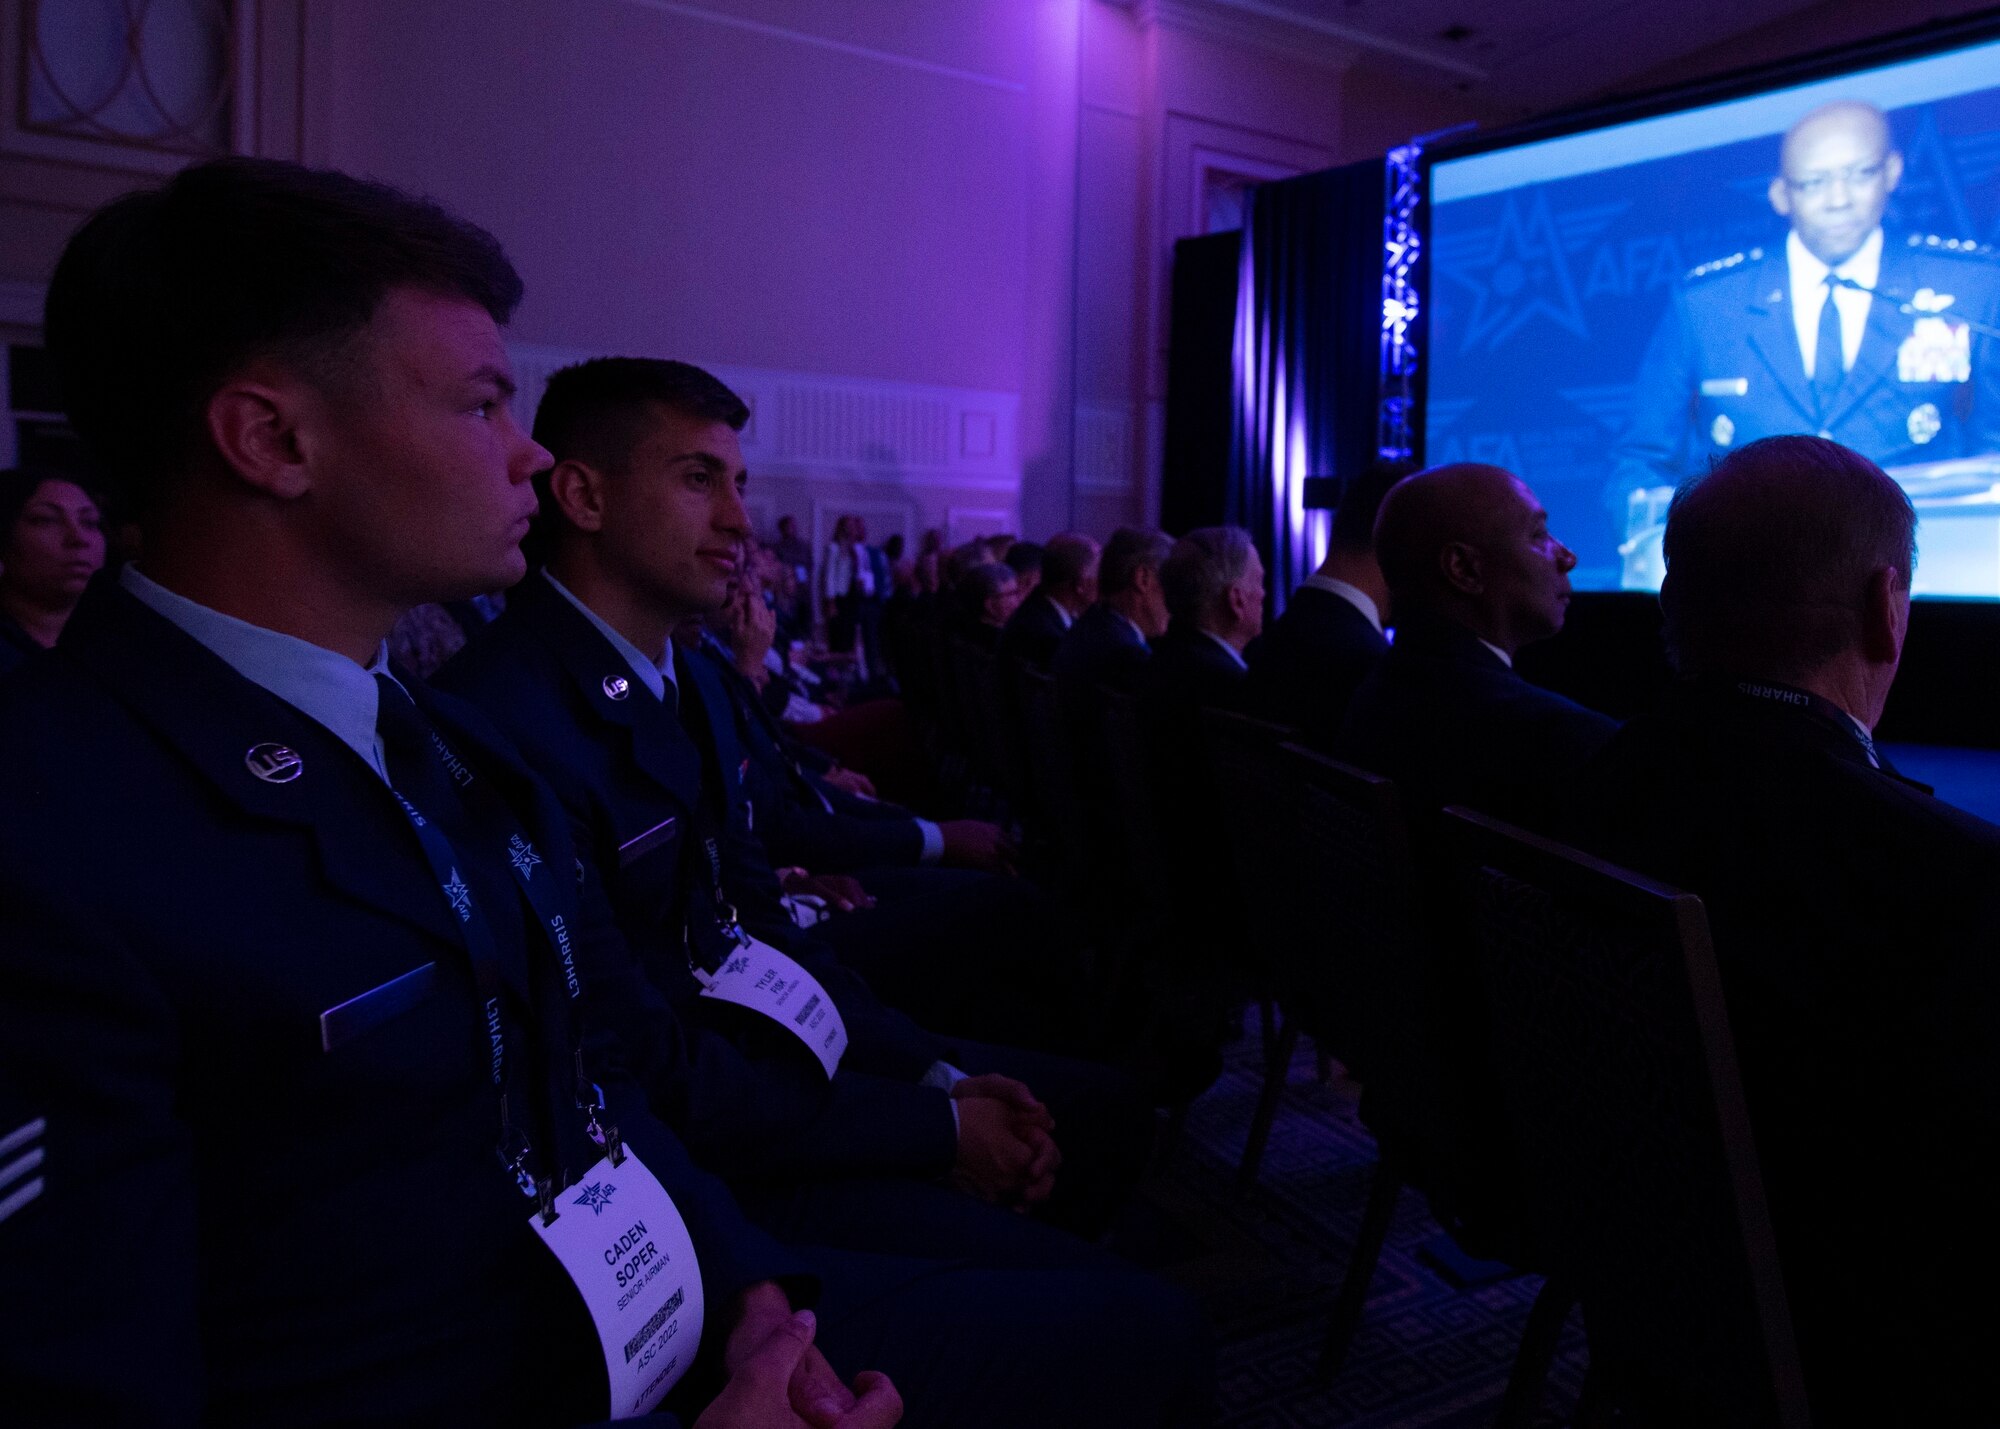 Senior Airman Caden A. Soper, 2022 Outstanding Airman of the Year representing Pacific Air Forces, listens to Air Force Chief of Staff Gen. CQ Brown, Jr., give the State of the Air Force address at the Air and Space Forces Association’s Air, Space and Cyber Conference in National Harbor, Md., Sept. 19, 2022. Soper was recognized as one of the 12 Outstanding Airmen of the Year based upon superior leadership, job performance and personal achievement. (U.S. Air Force photo by Staff Sgt. Nick Z. Erwin)